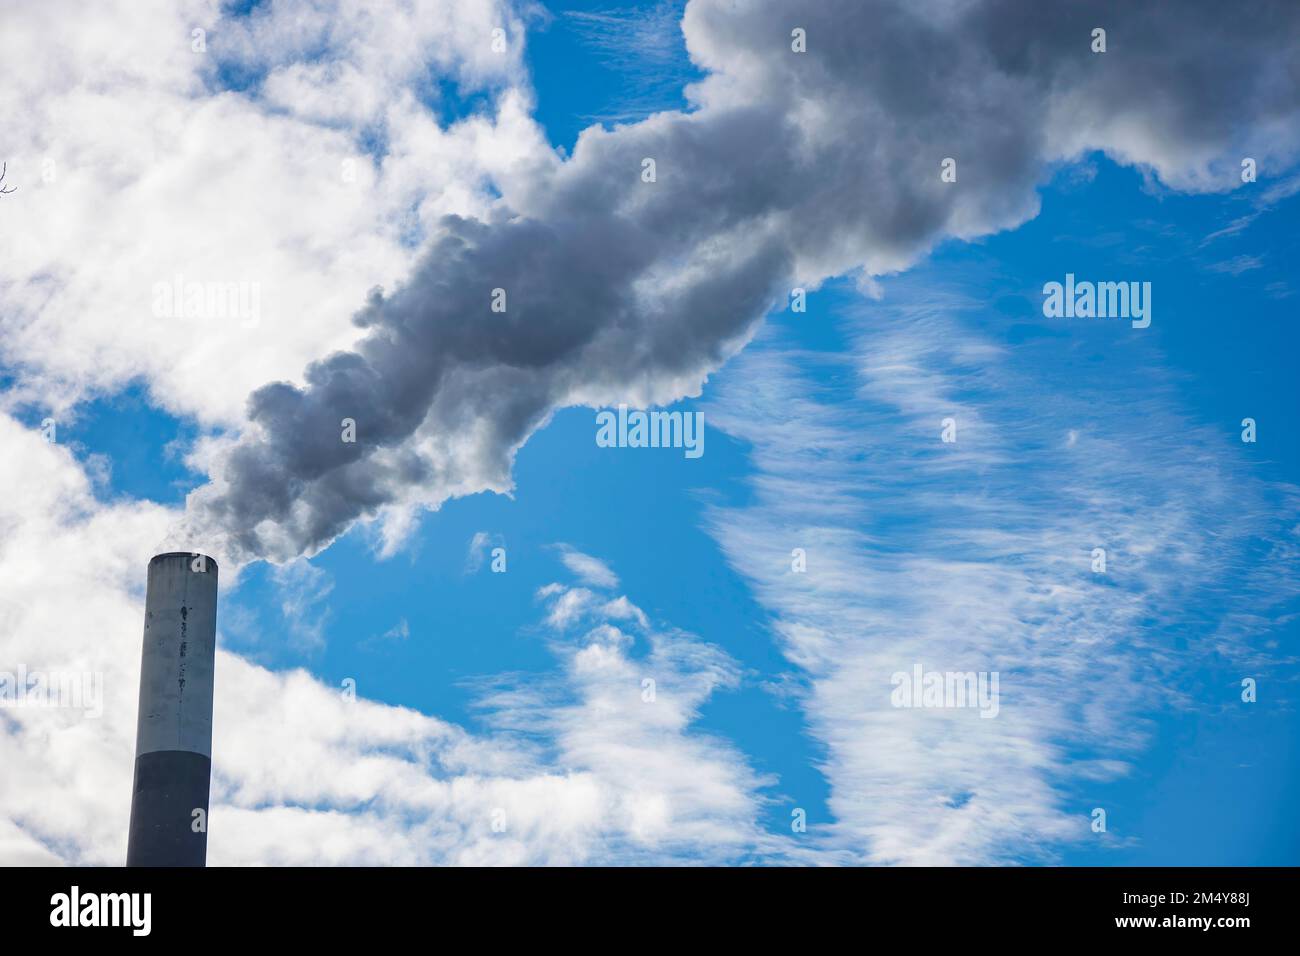 Industrial chimney, thermal power plant, pollution in the air, steam cooling tower in Graz, Styria region, Austria. Stock Photo